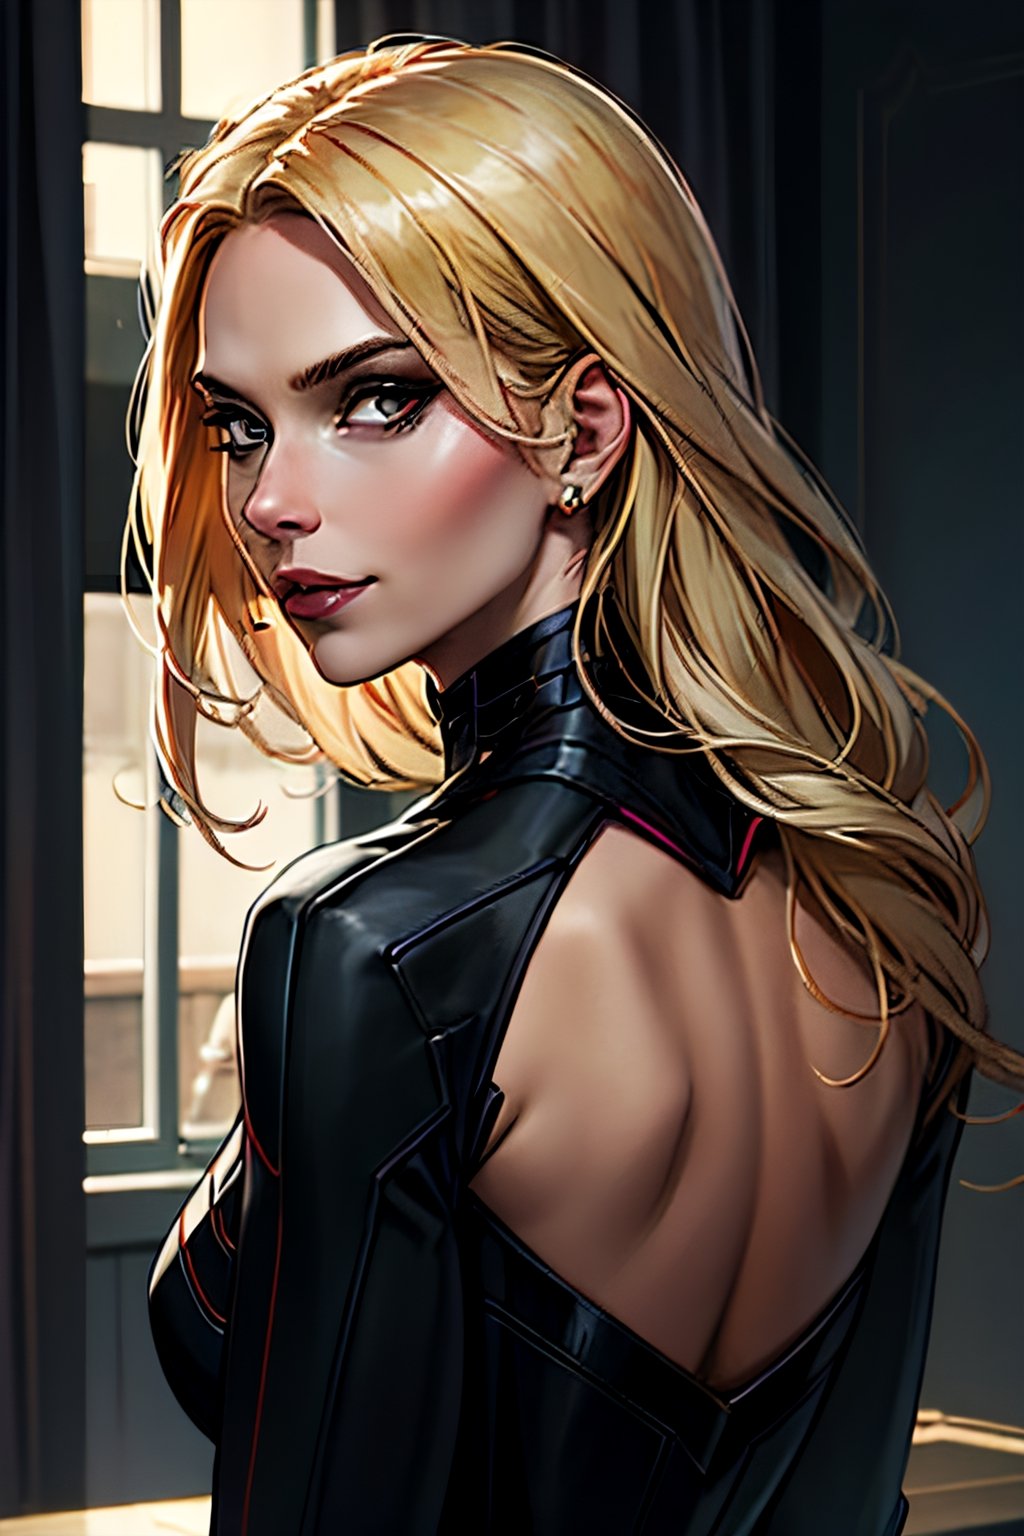 sks woman, black widow, blonde hair, facial portrait, sexy stare, smirked, inside base, from behind 